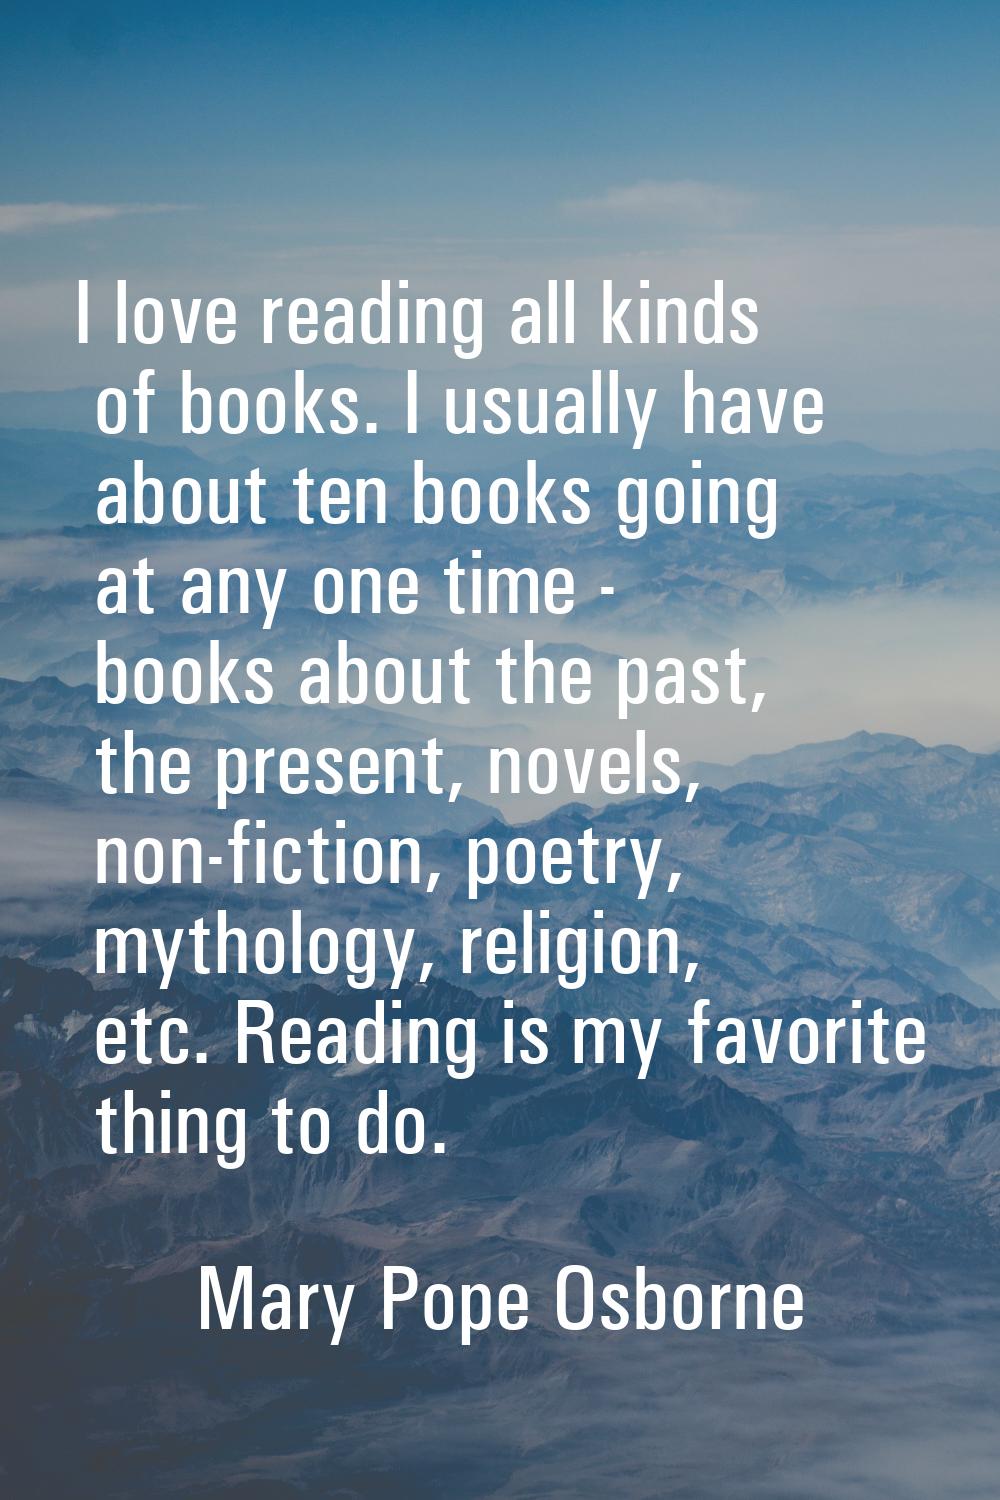 I love reading all kinds of books. I usually have about ten books going at any one time - books abo